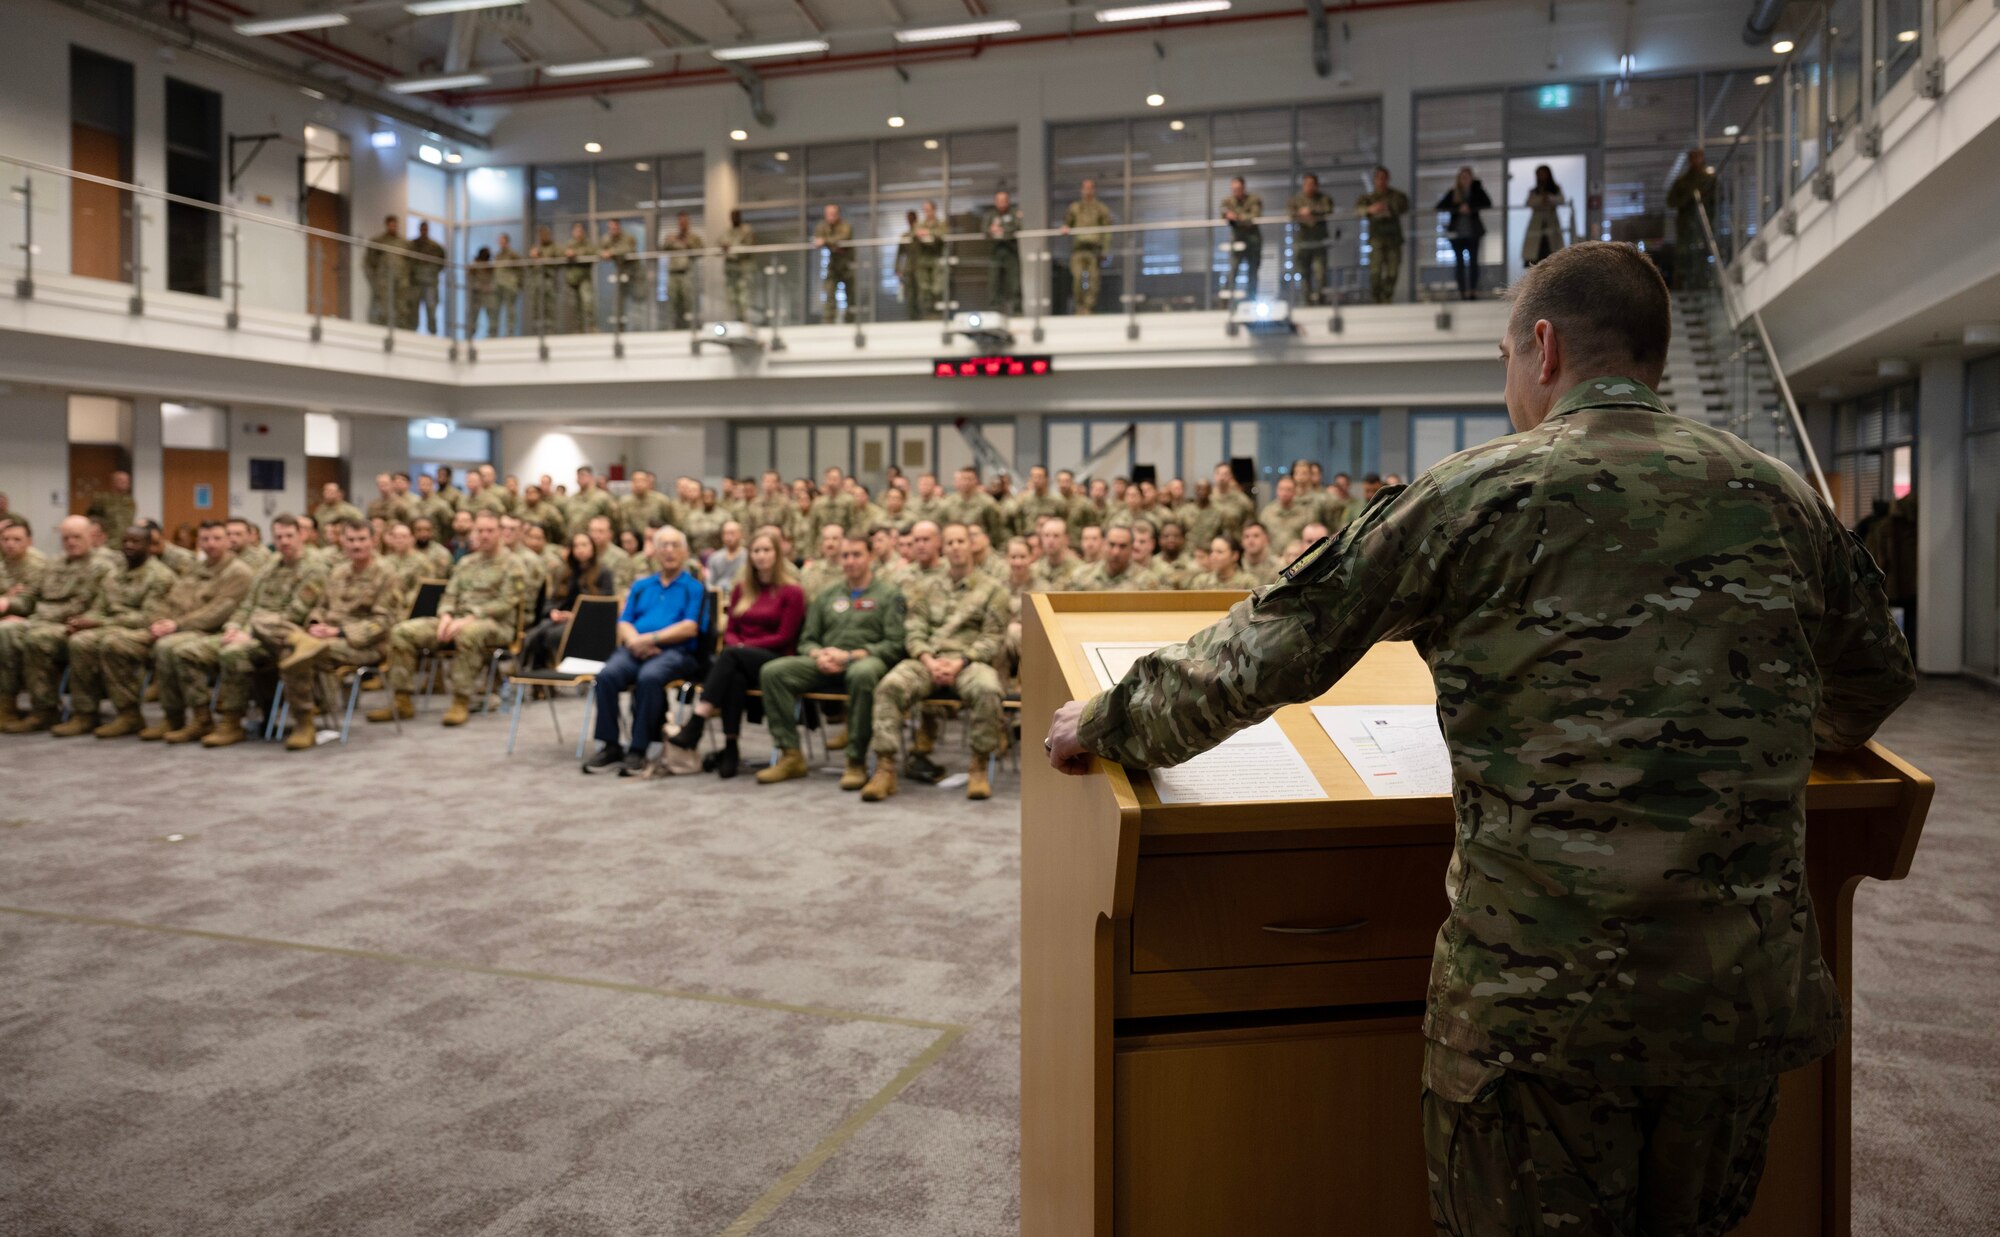 U.S. Air Force Col. Bryan T. Callahan, 435th Air Ground Operations Wing commander, speaks during an award ceremony at Ramstein Air Base, Germany, Feb. 3, 2023.